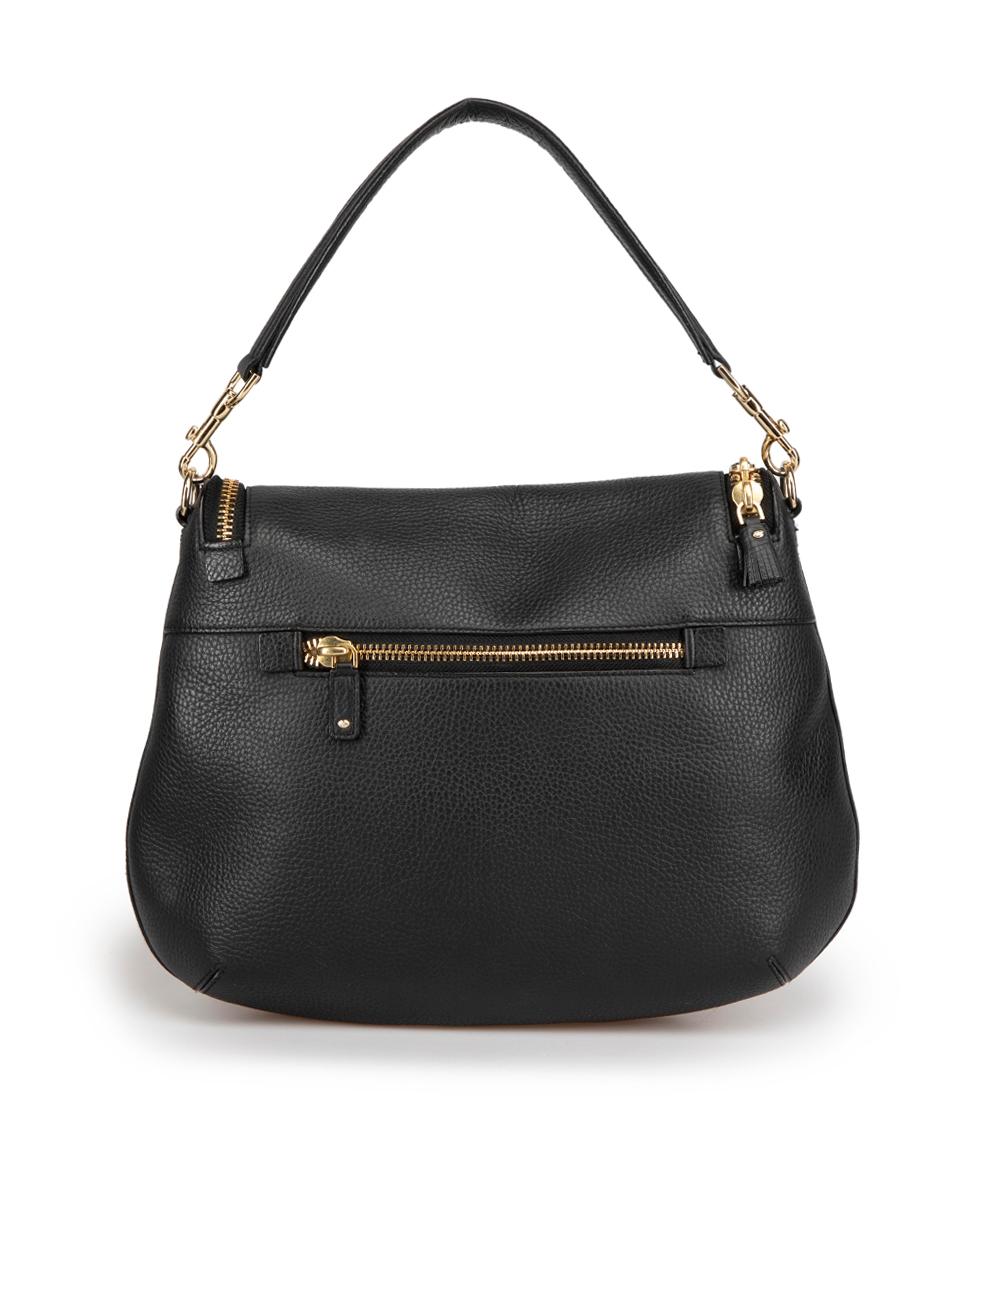 Anya Hindmarch Black Leather Vere Slouchy Bag In Excellent Condition In London, GB